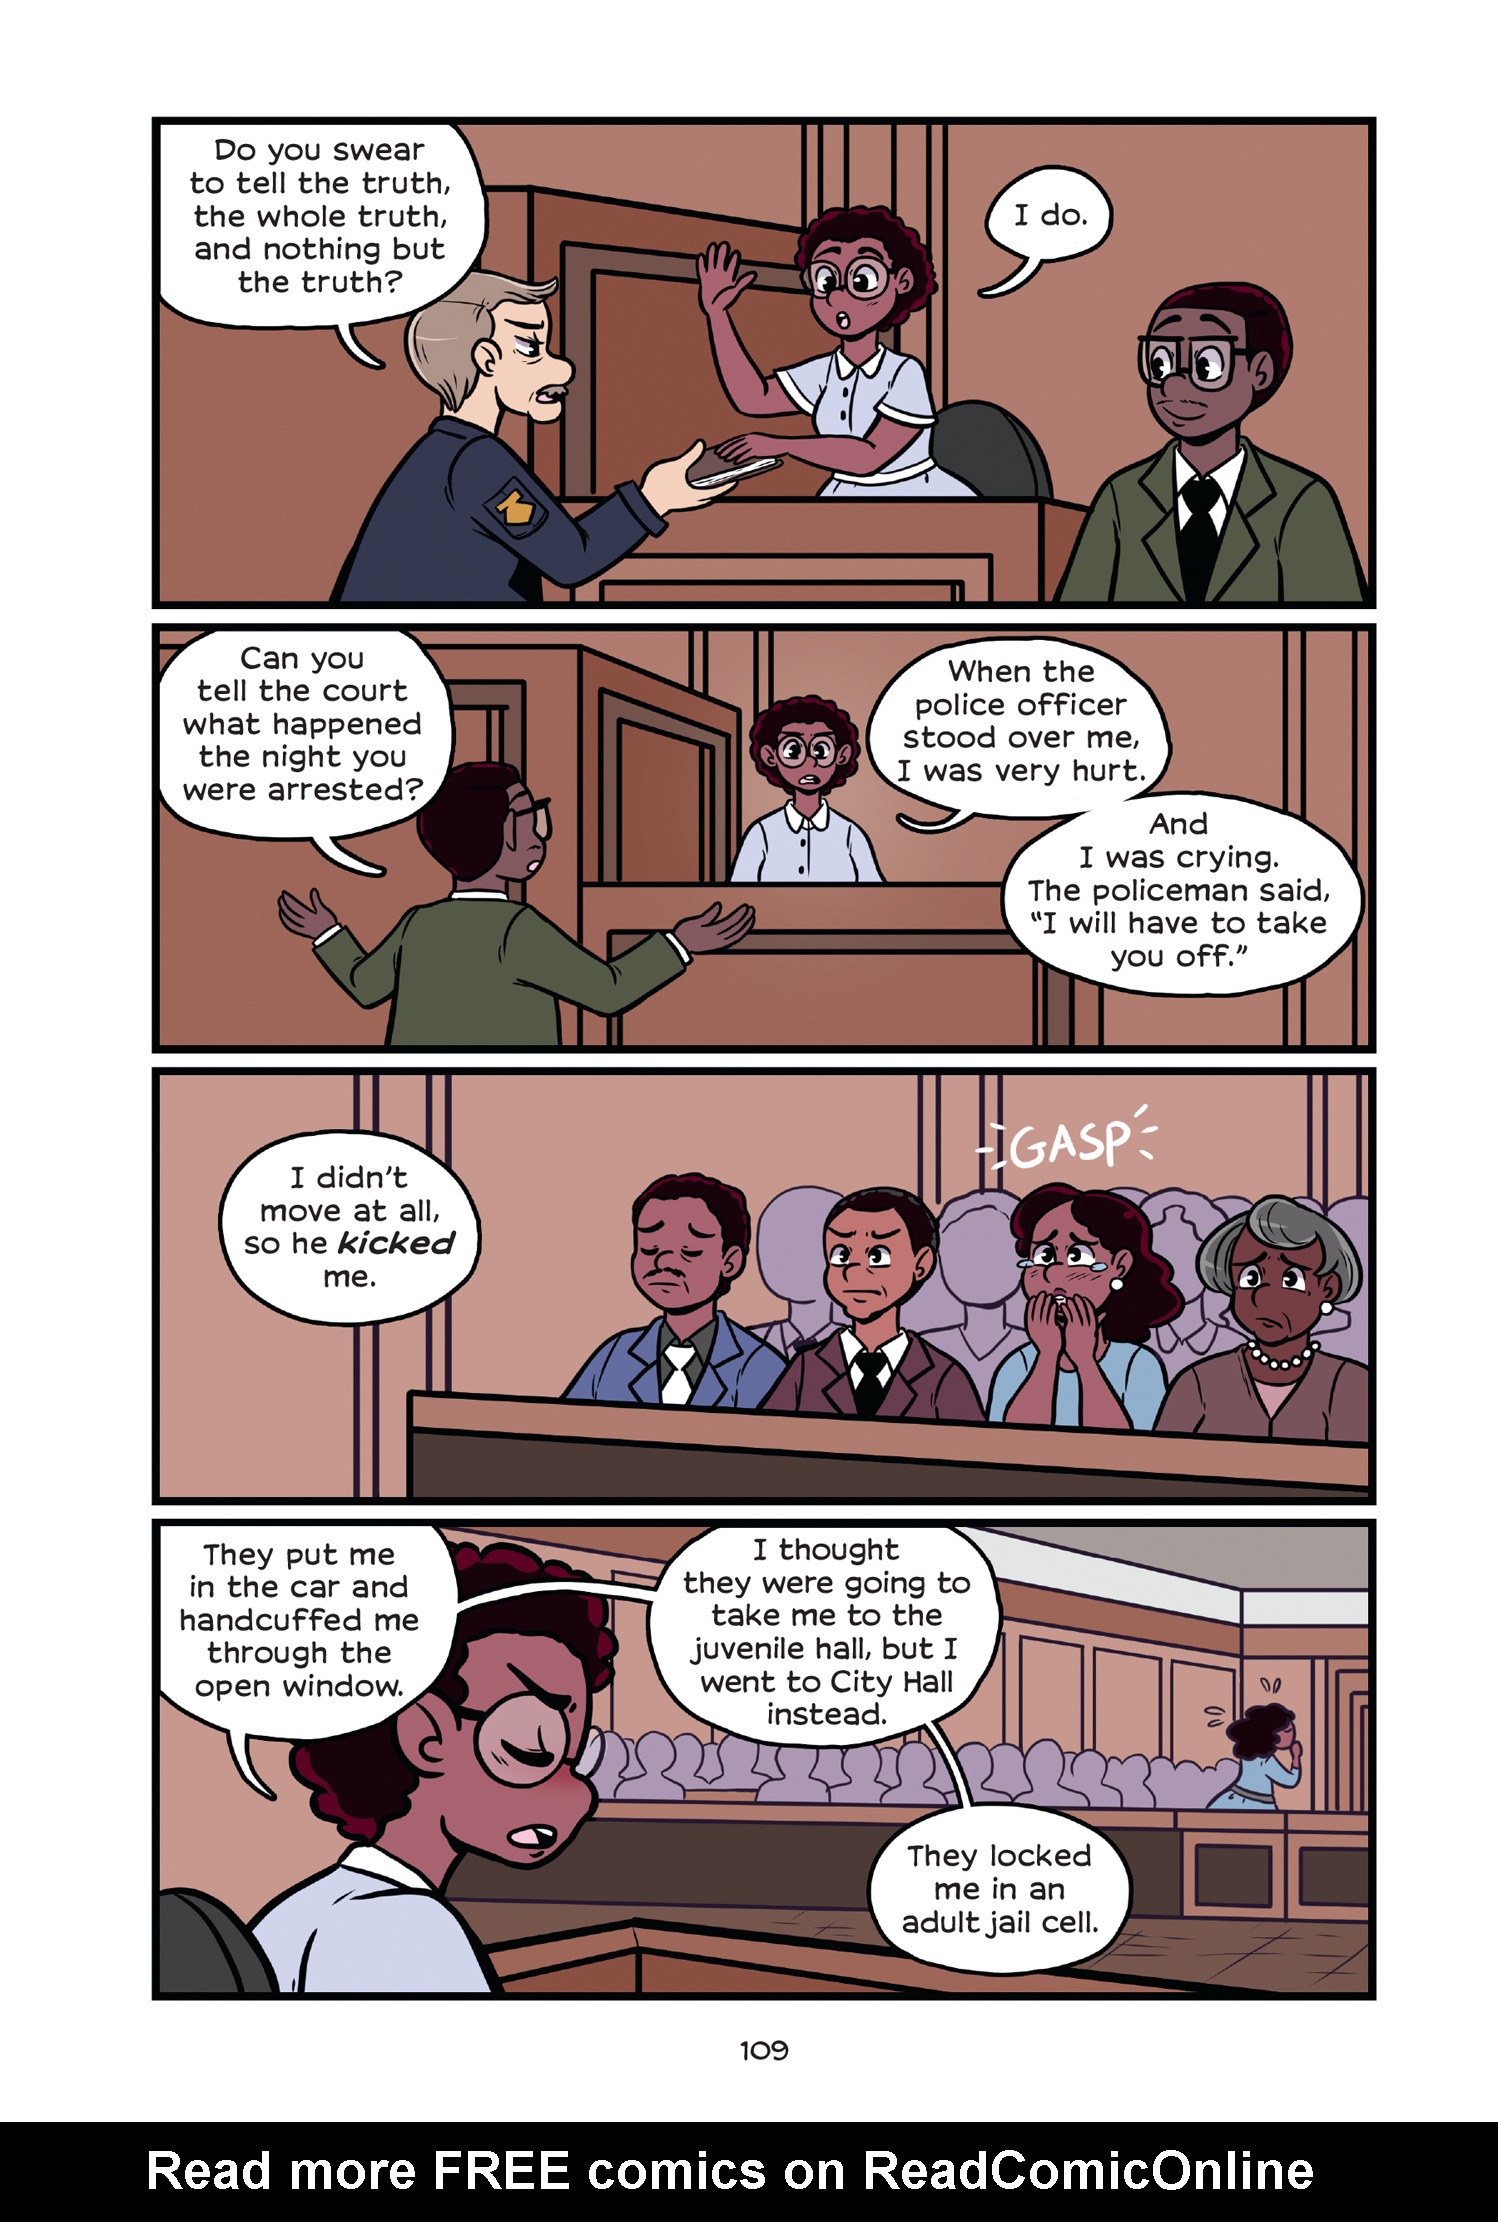 Read online History Comics comic -  Issue # Rosa Parks & Claudette Colvin - Civil Rights Heroes - 114